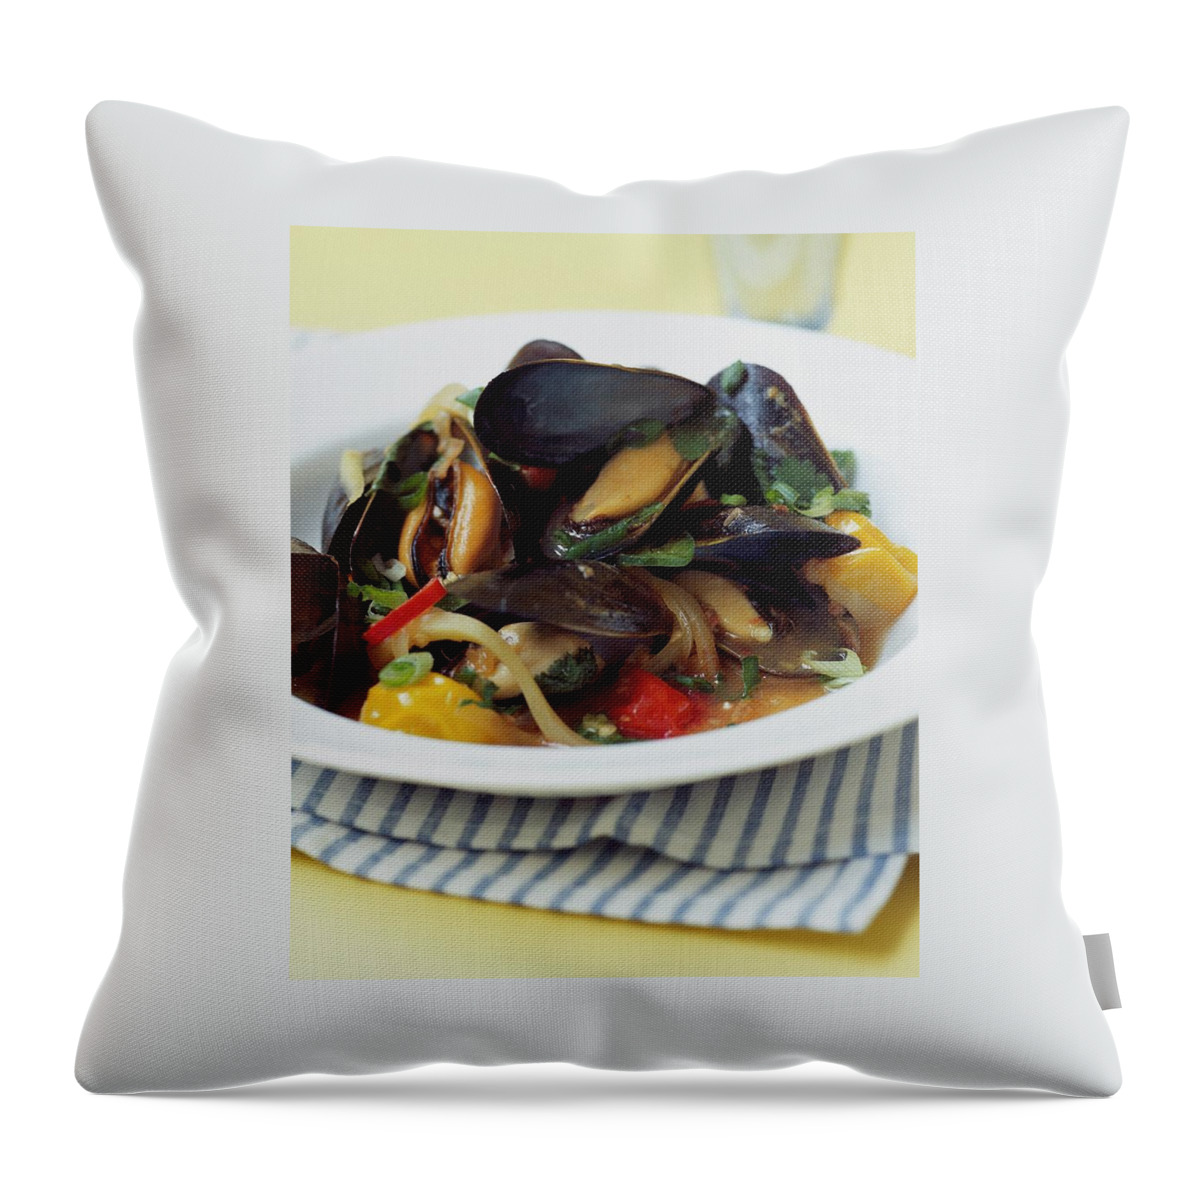 A Thai Dish Of Mussels And Papaya Throw Pillow